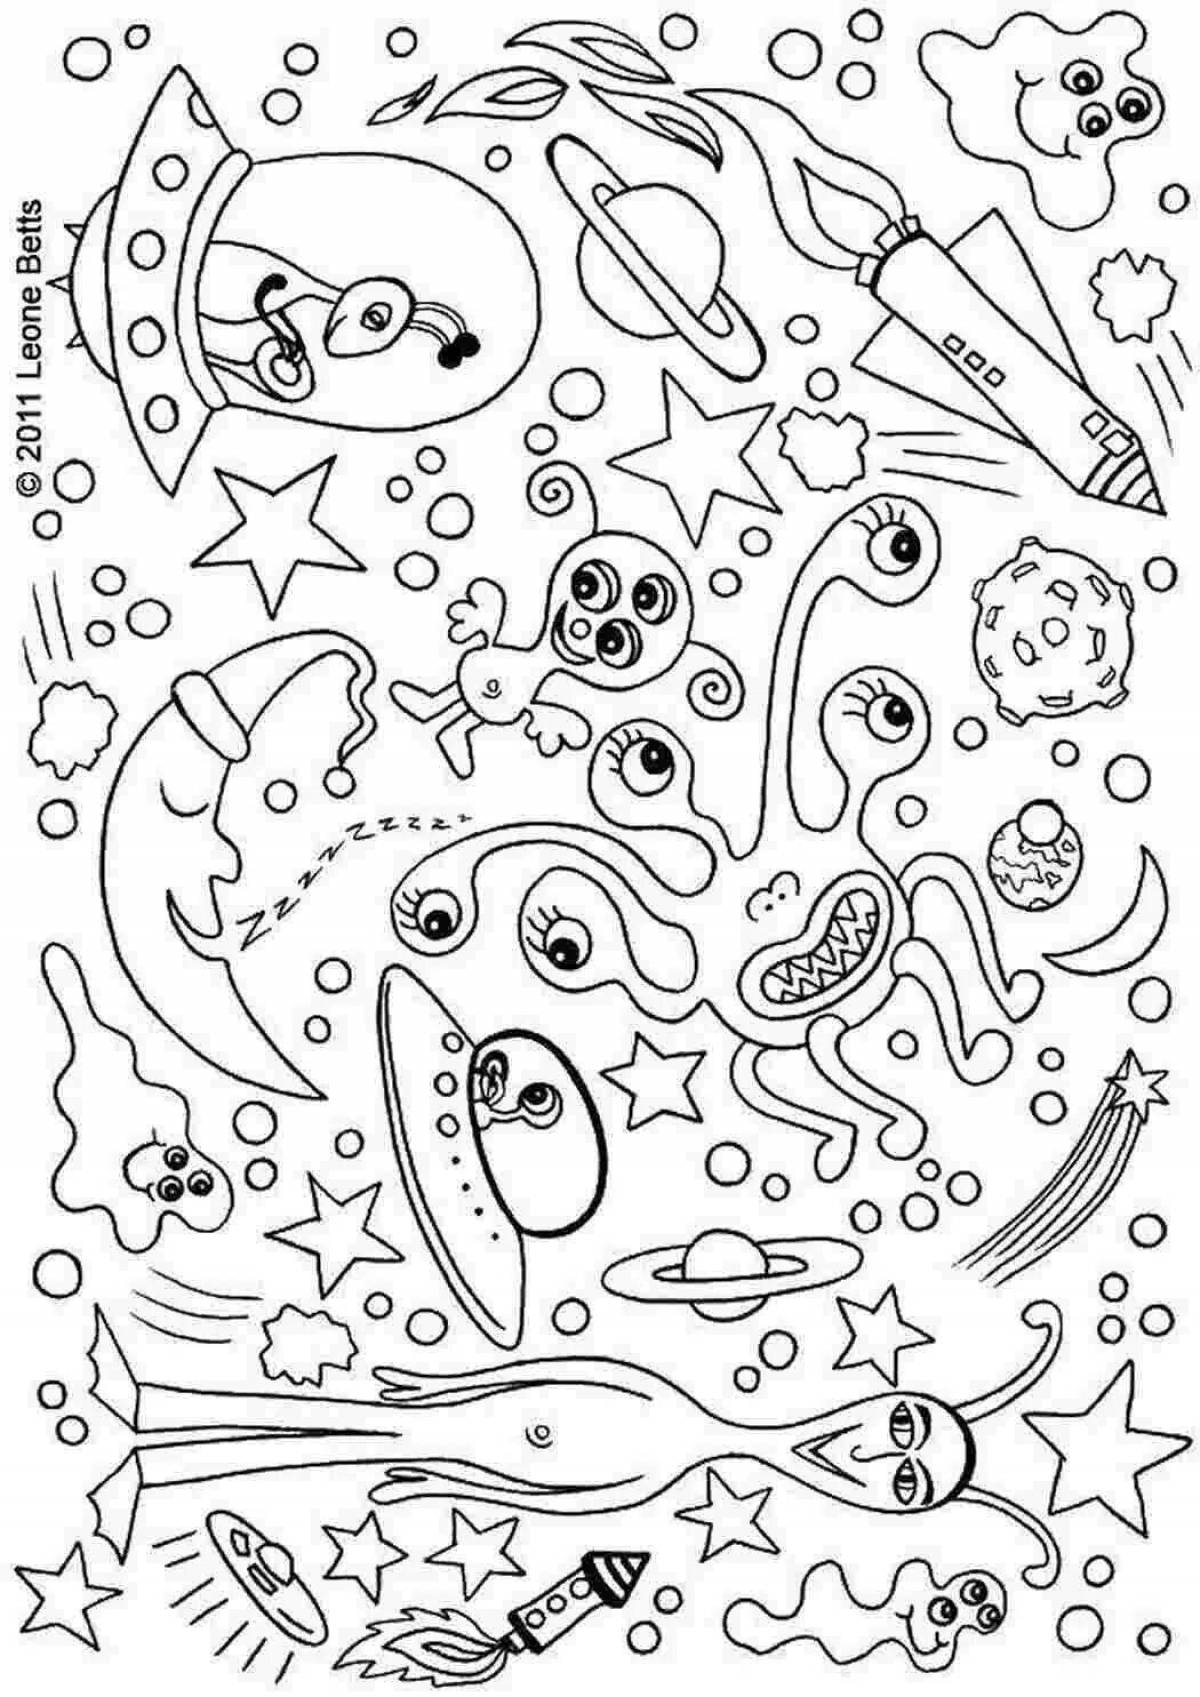 Colorful space coloring game